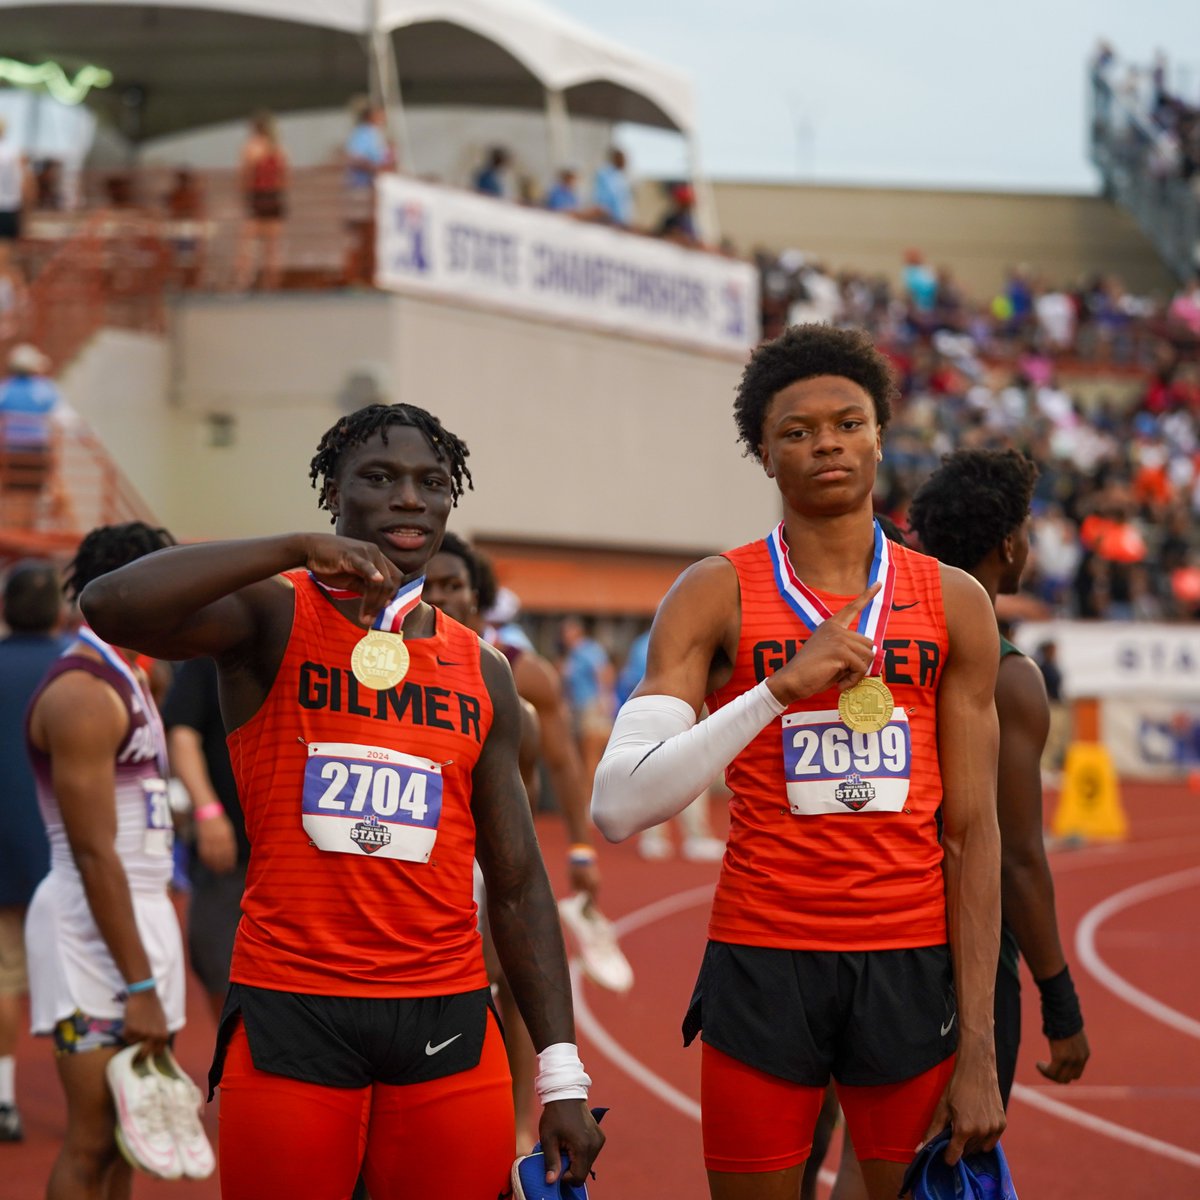 Alvin Iowa Colony & Gilmer TIE for 🏆 w/ 66 team points! Congrats to the Pioneers & Buckeyes on the Conf 4A Boys #UILState Track & Field Championship!